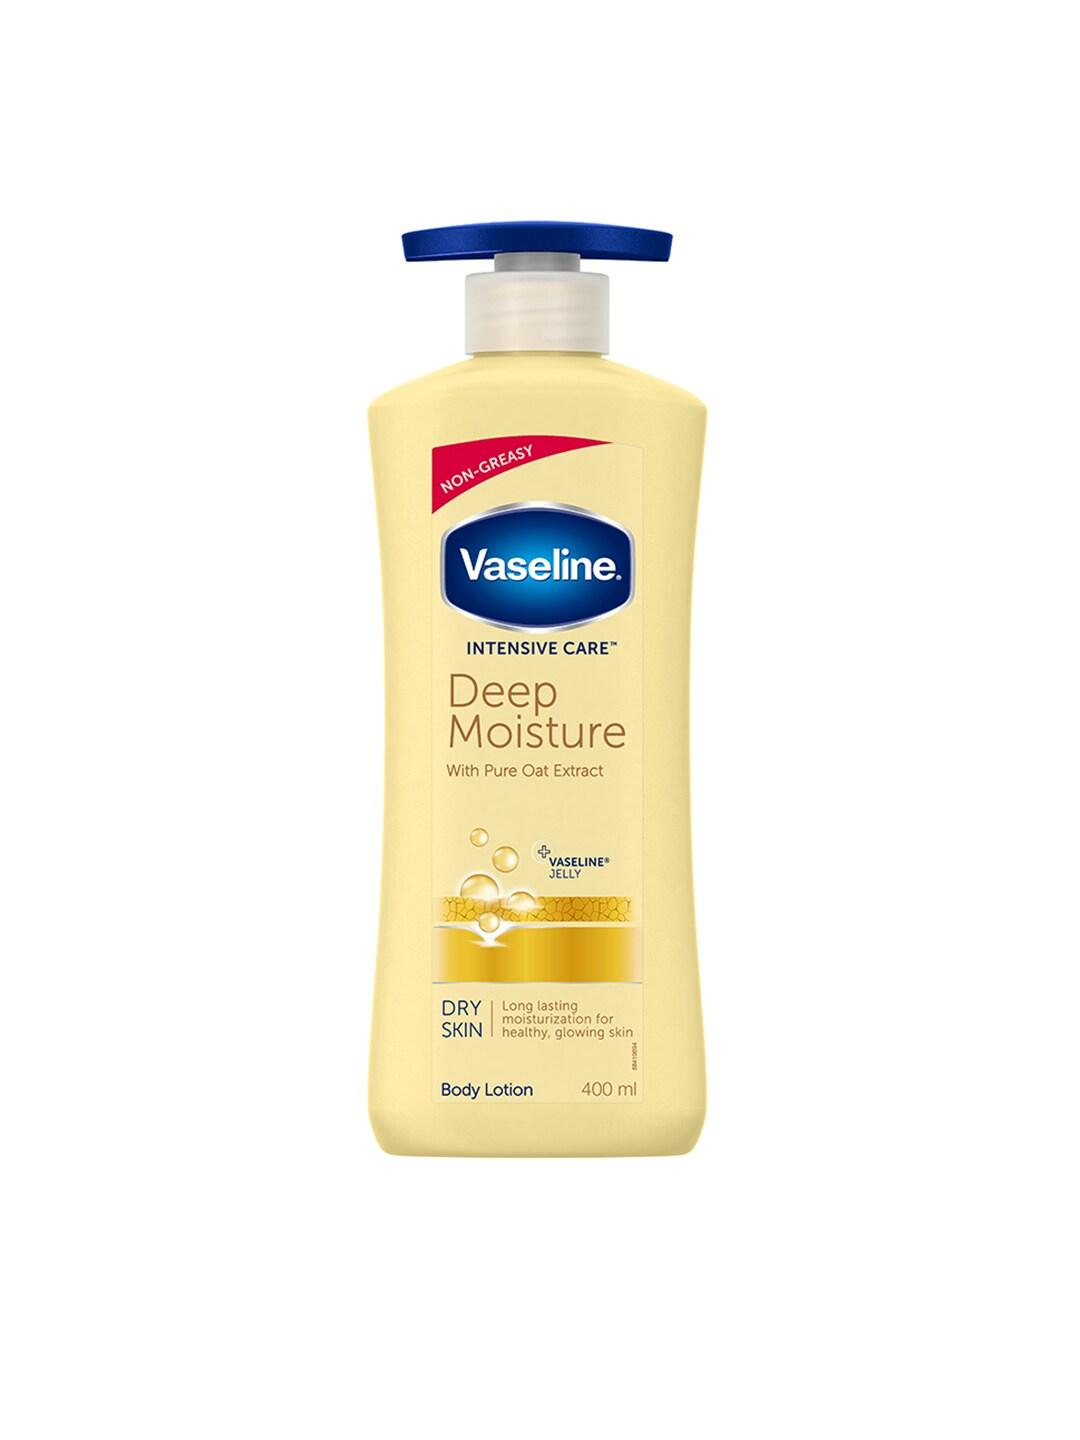 Vaseline Intensive Care Deep Moisture Body Lotion with Pure Oat Extract - 400 ml